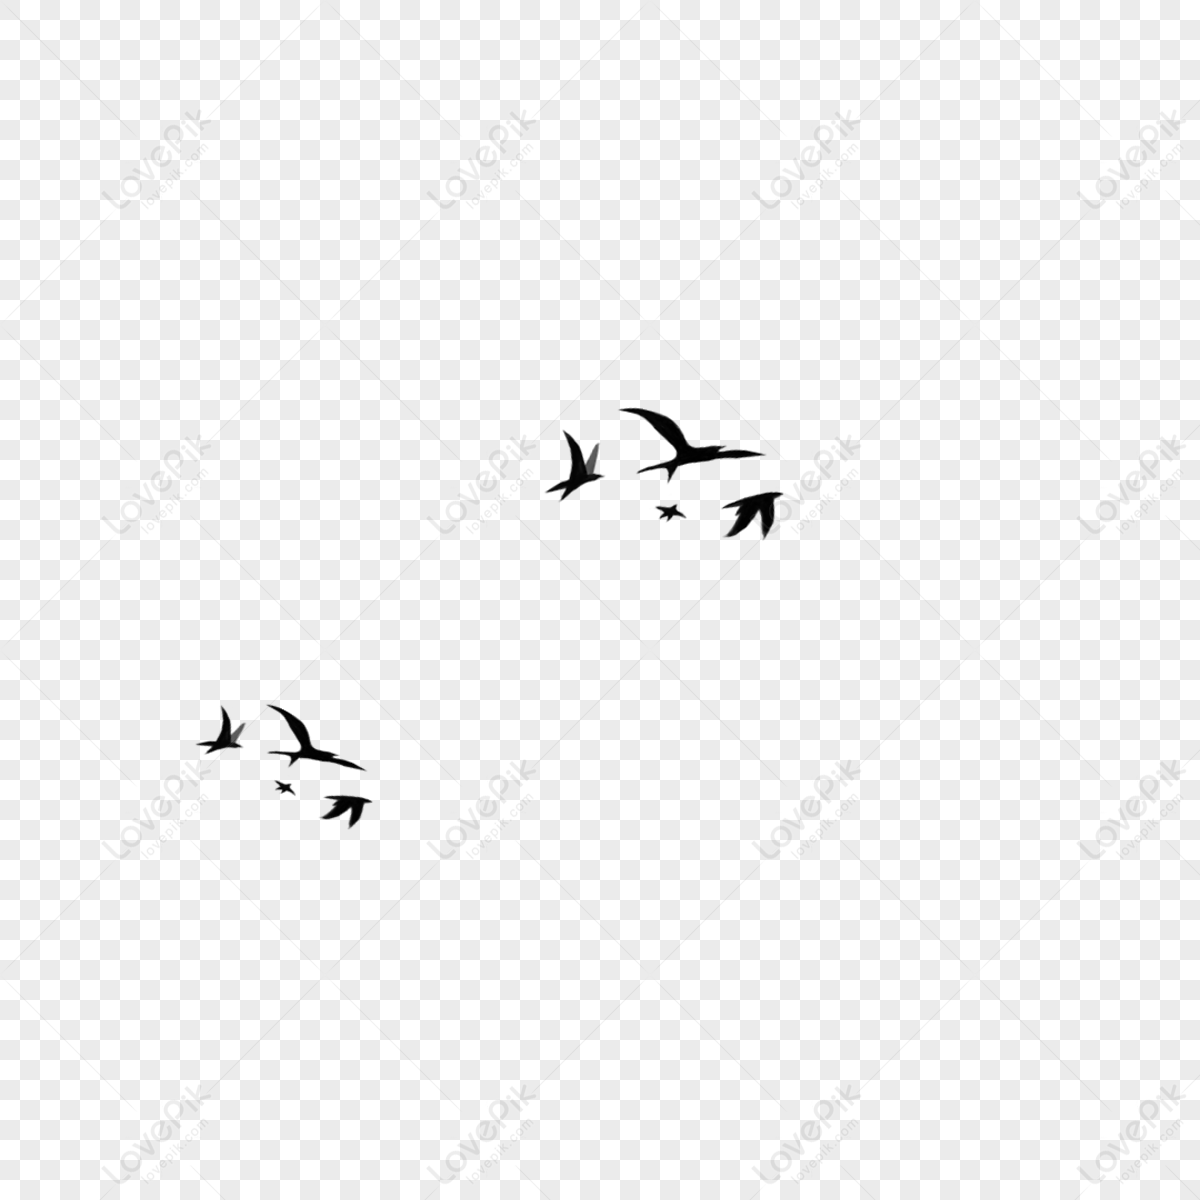 A Flying Bird PNG Transparent And Clipart Image For Free Download ...